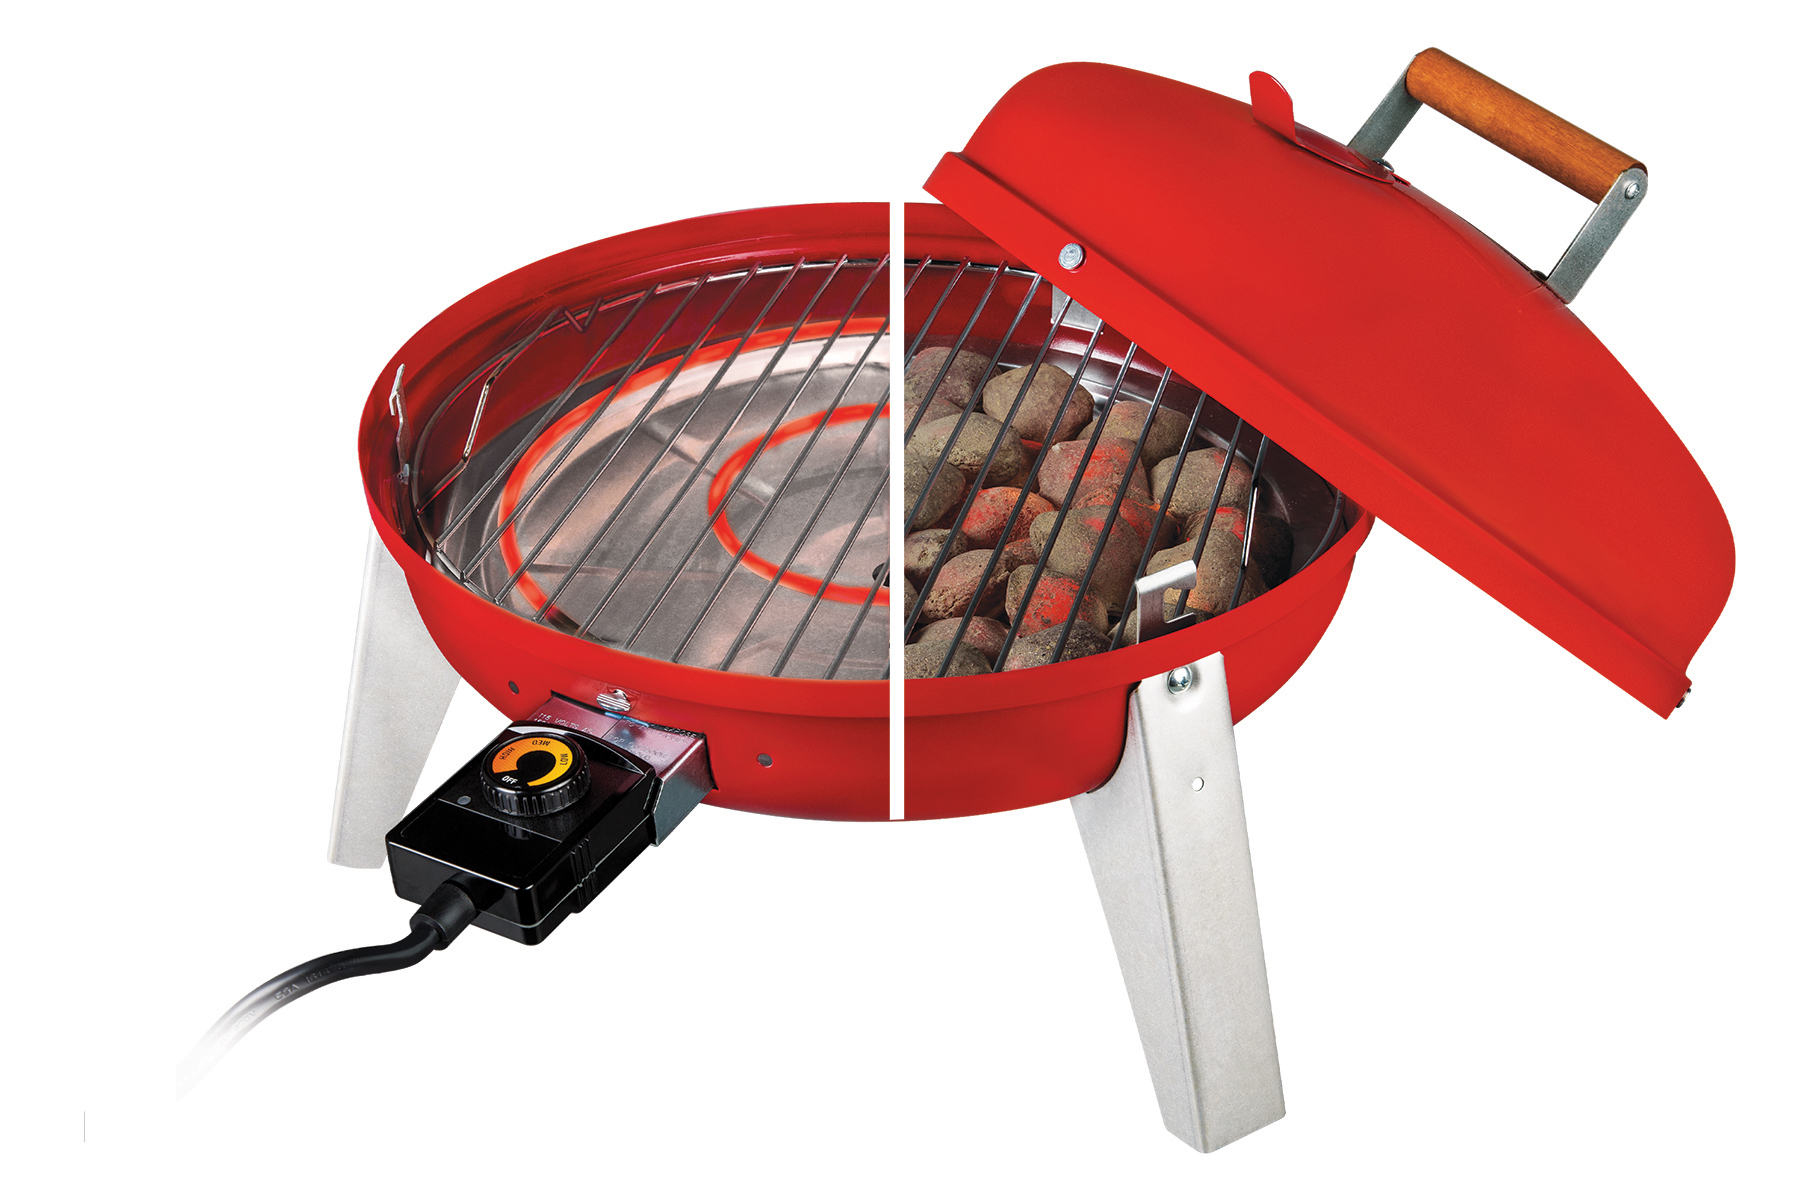 americana-4-in-1-dual-fuel-smoker-and-grill-red-model-5035u4-511-meco